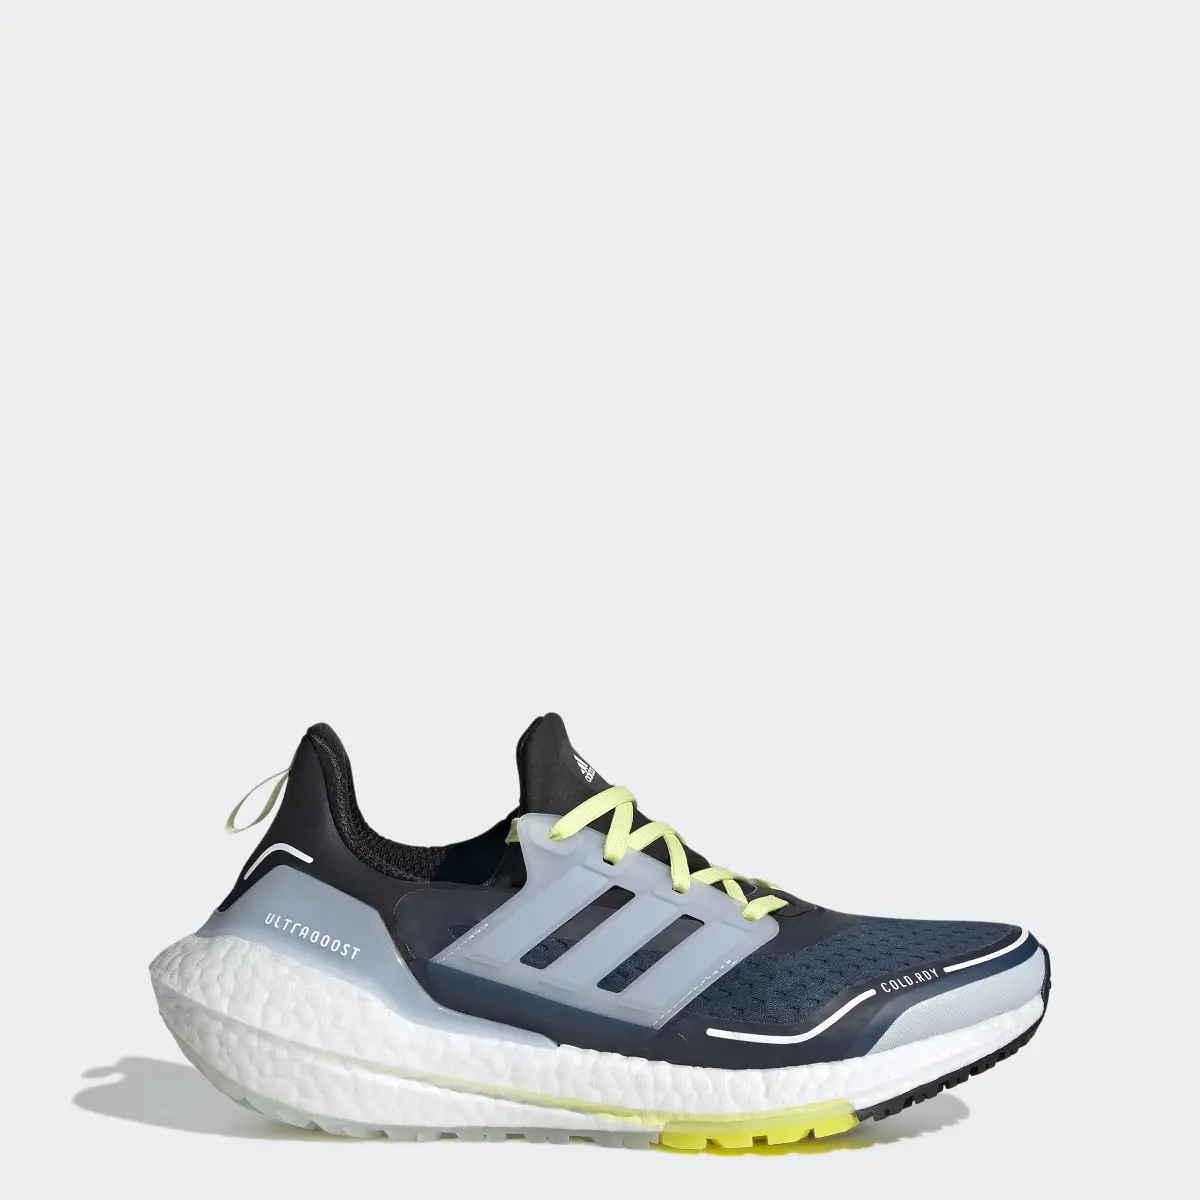 Adidas Ultraboost 21 COLD.RDY Shoes. 1